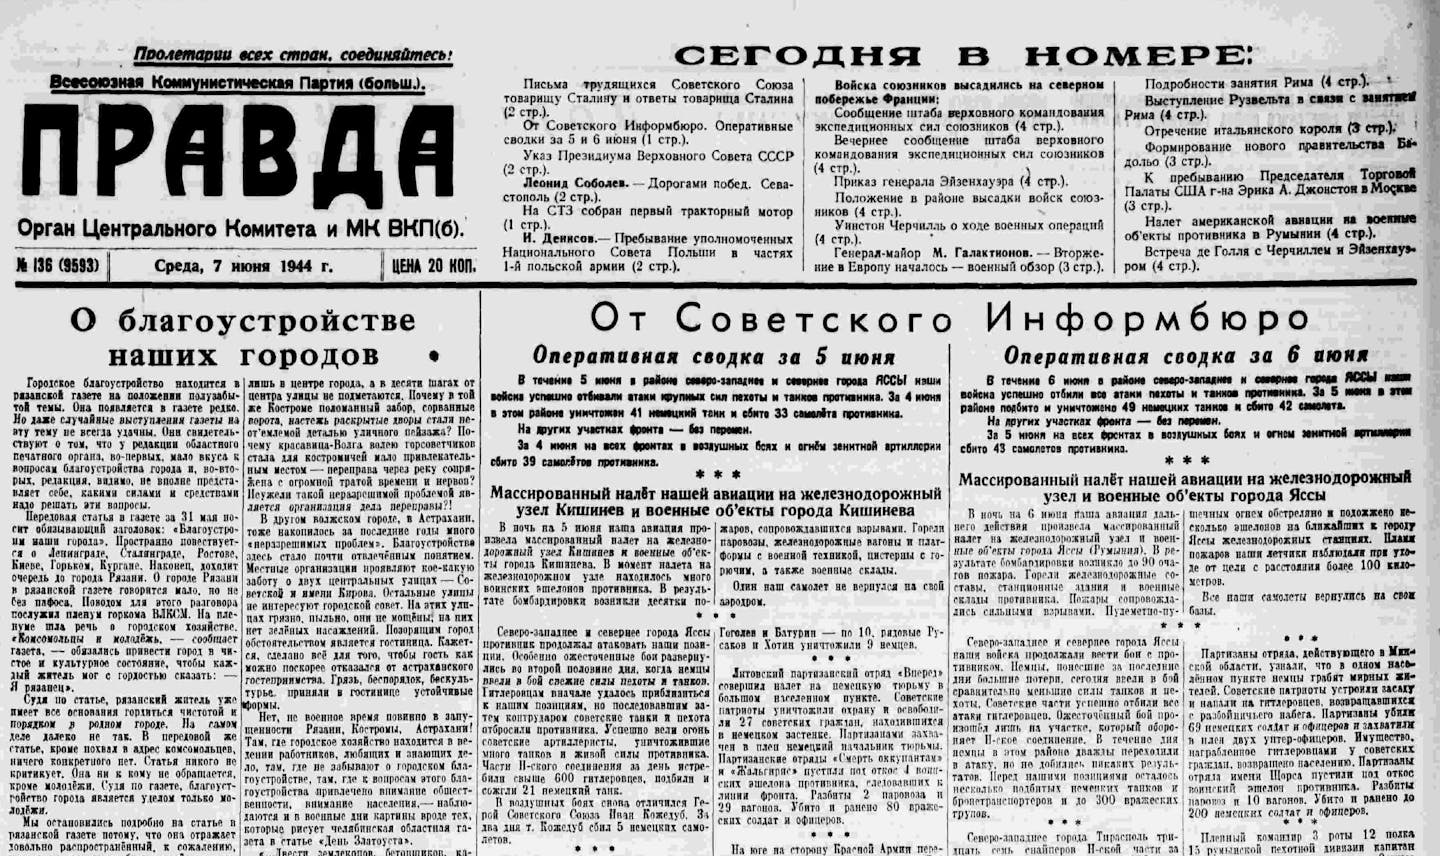 Soviet media downplayed the significance of the D-Day invasion